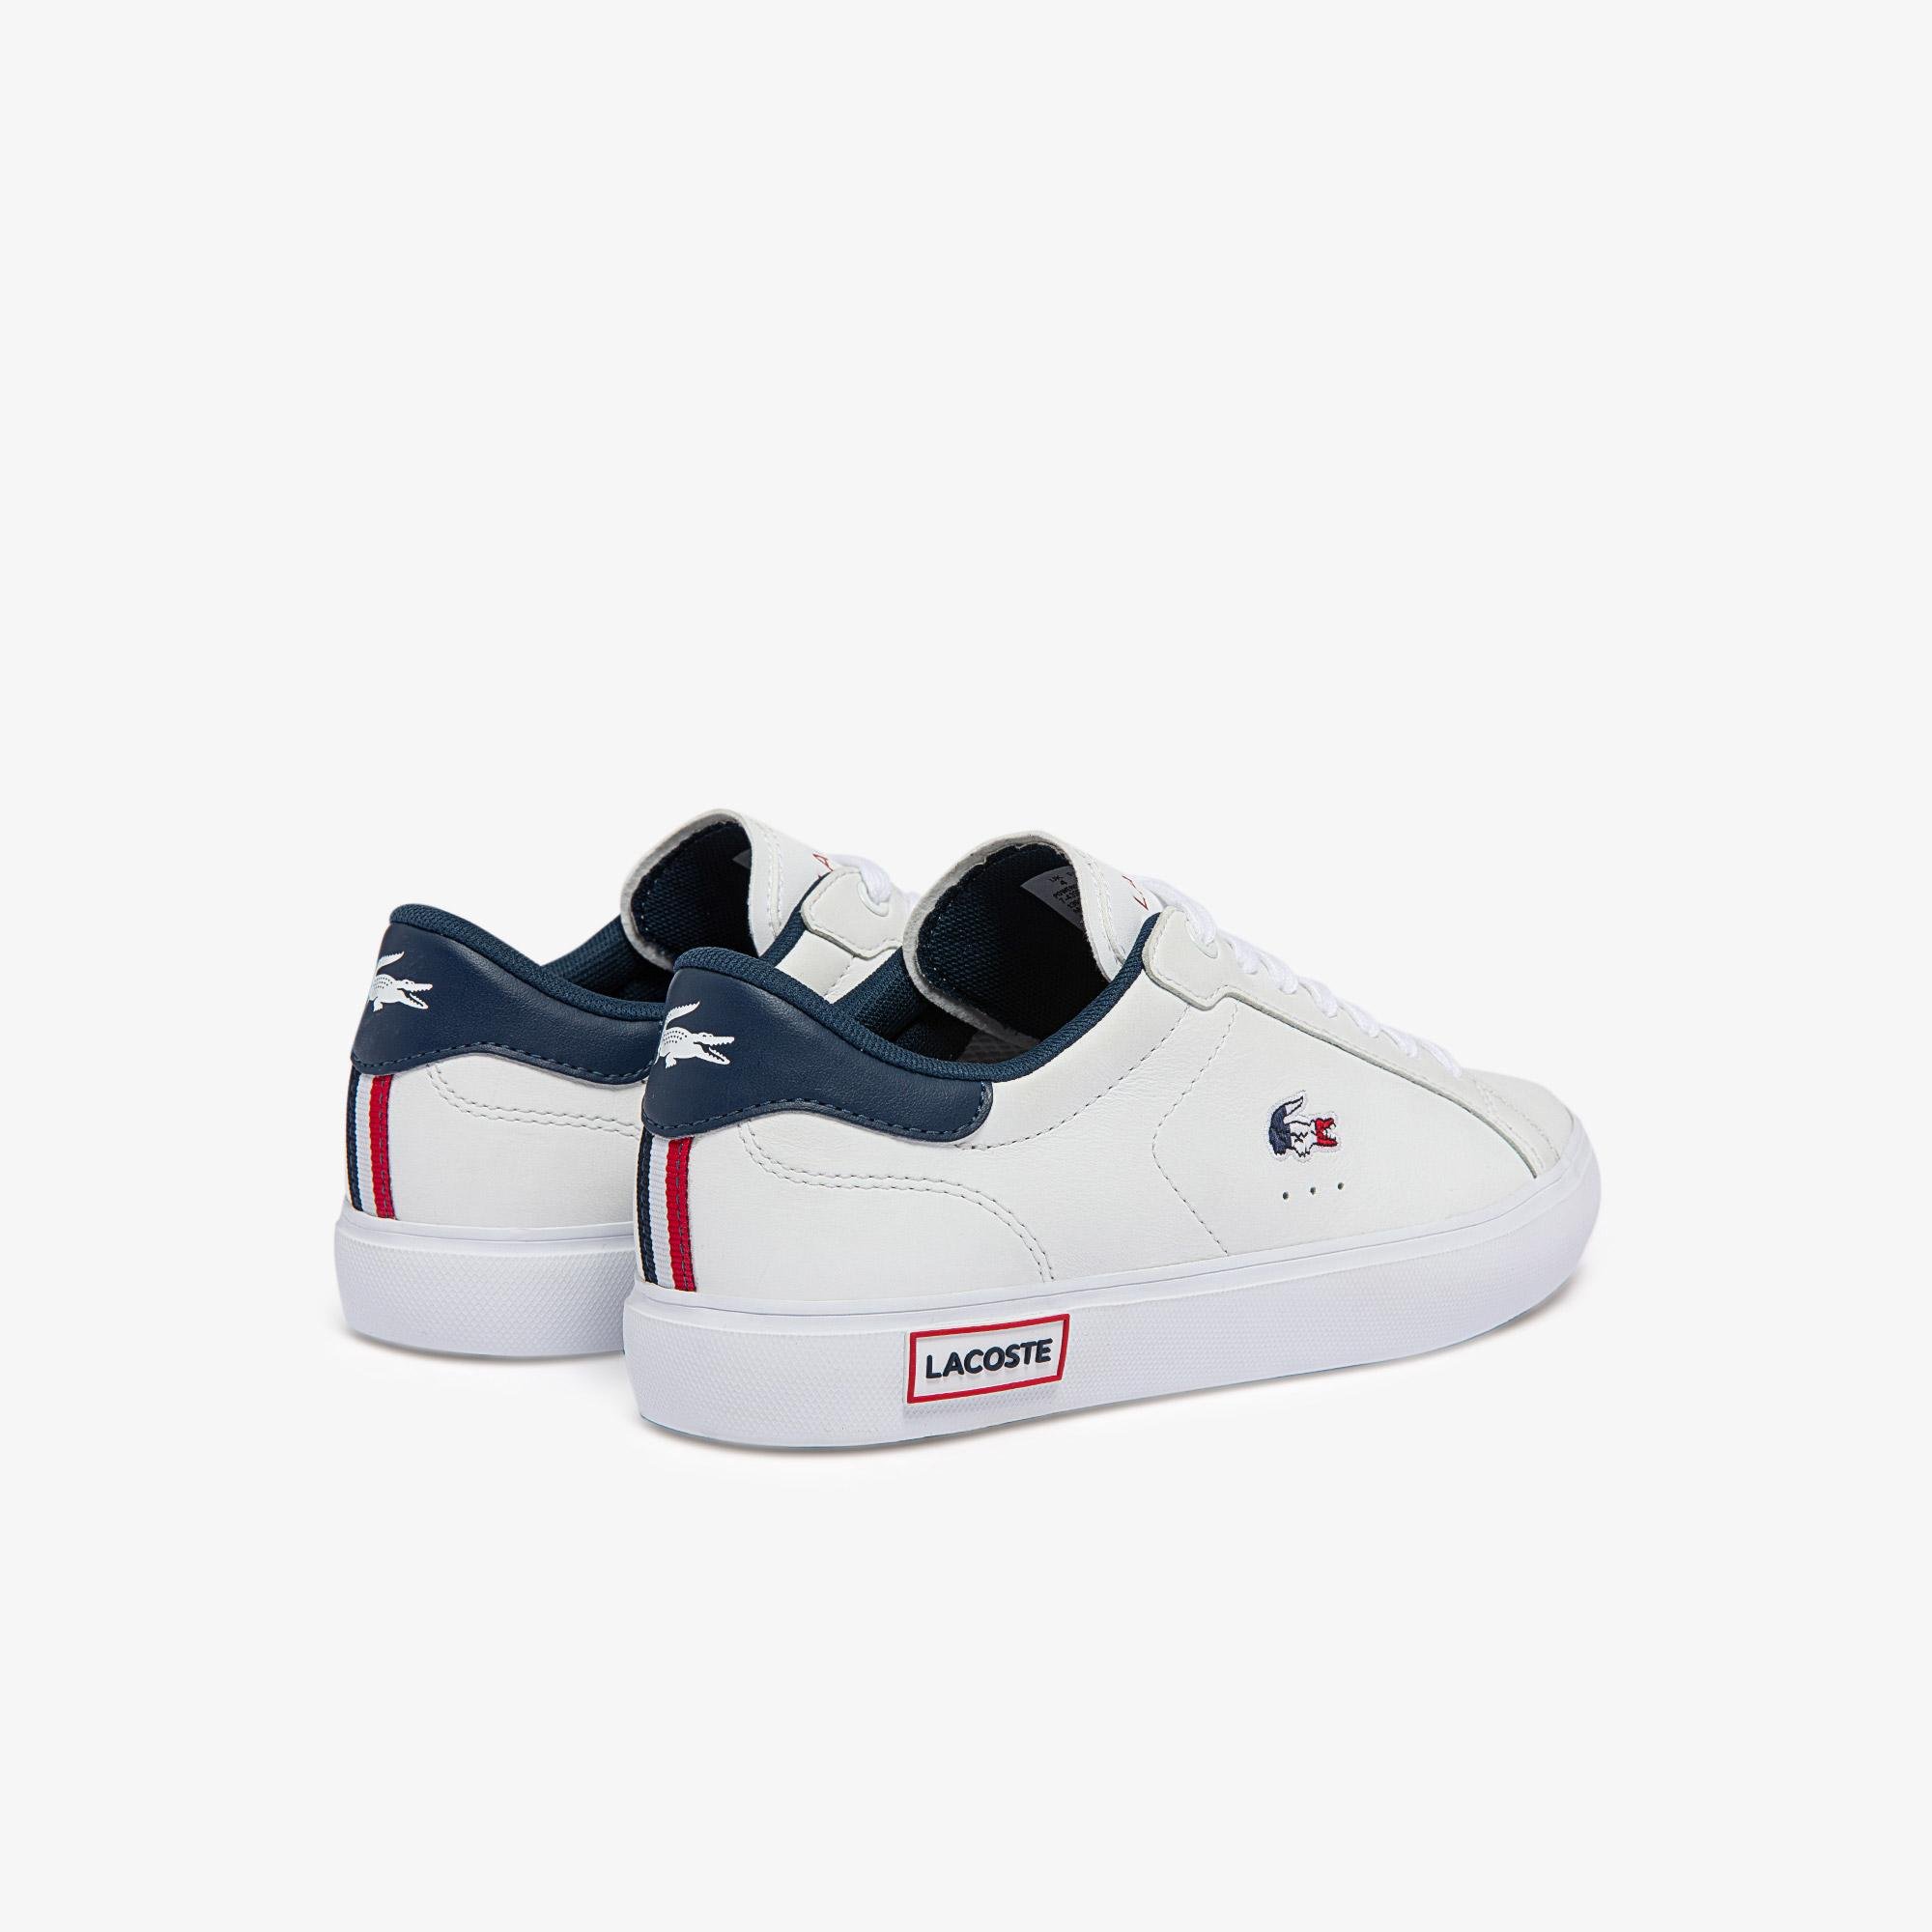 Lacoste Women's tri-color Powercourt leather trainers